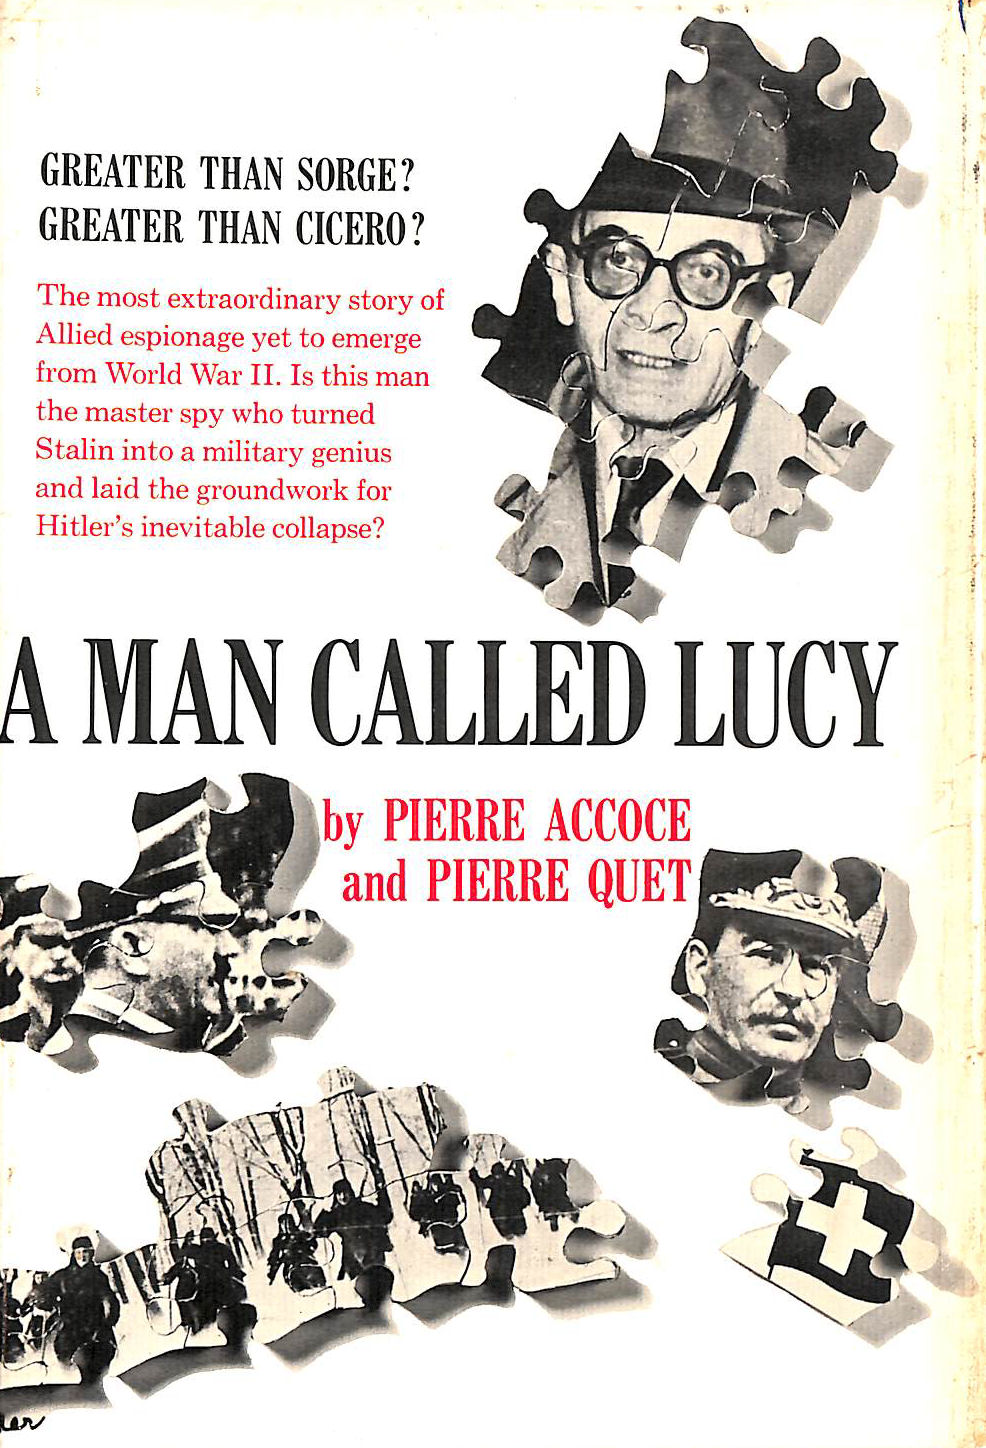 ACCOCE, PIERRE - A Man Called Lucy